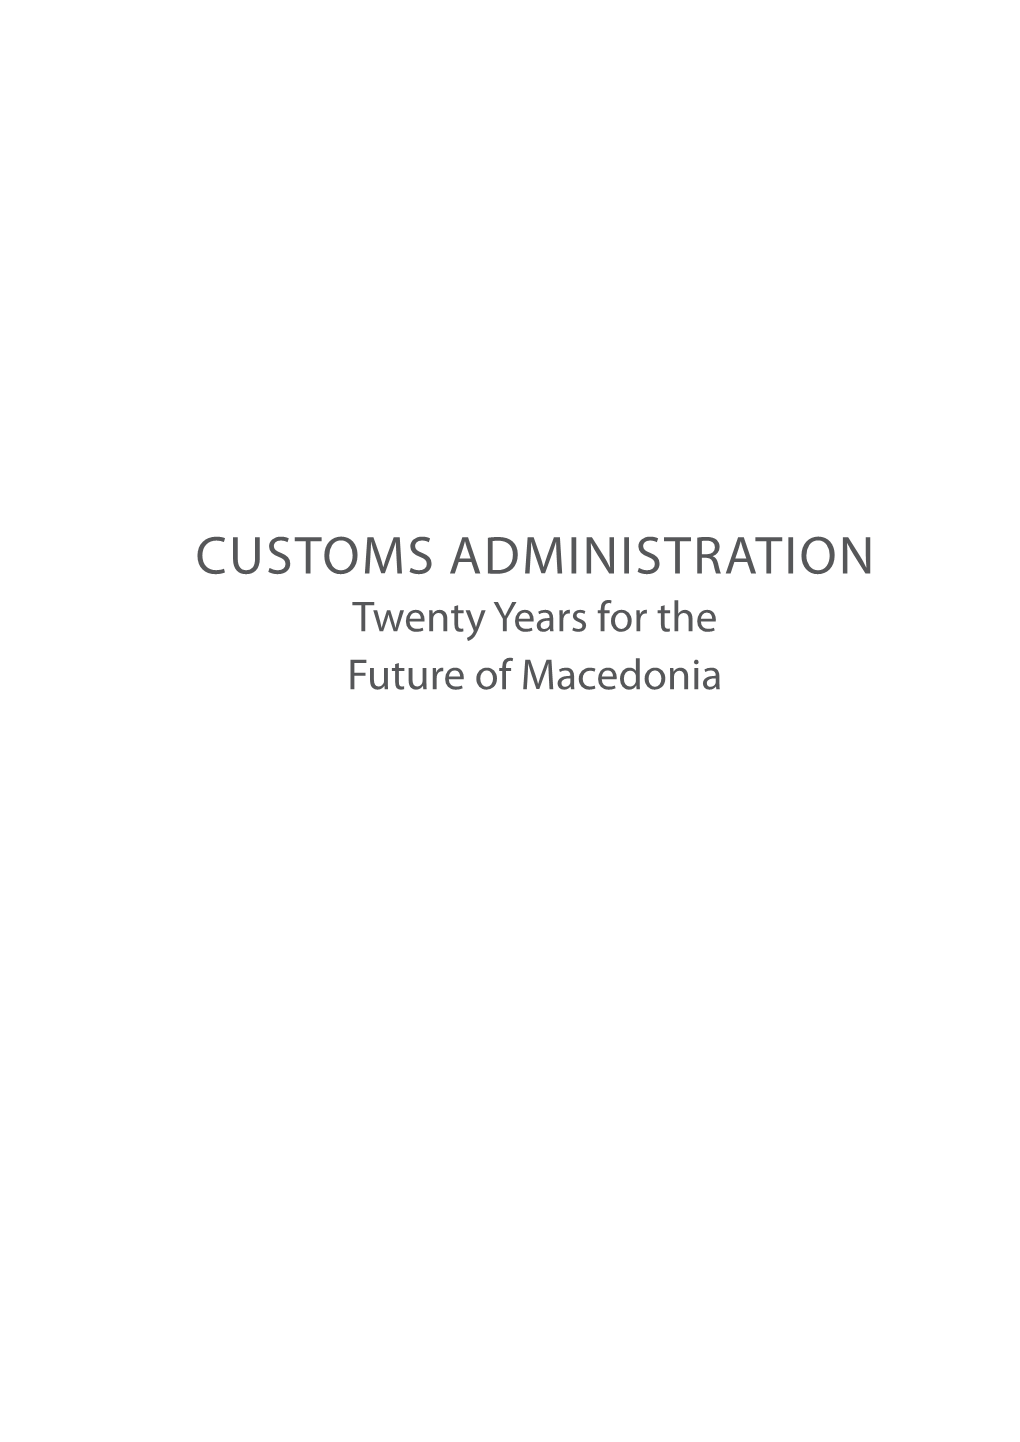 Customs Administration – Twenty Years for the Future of Macedonia